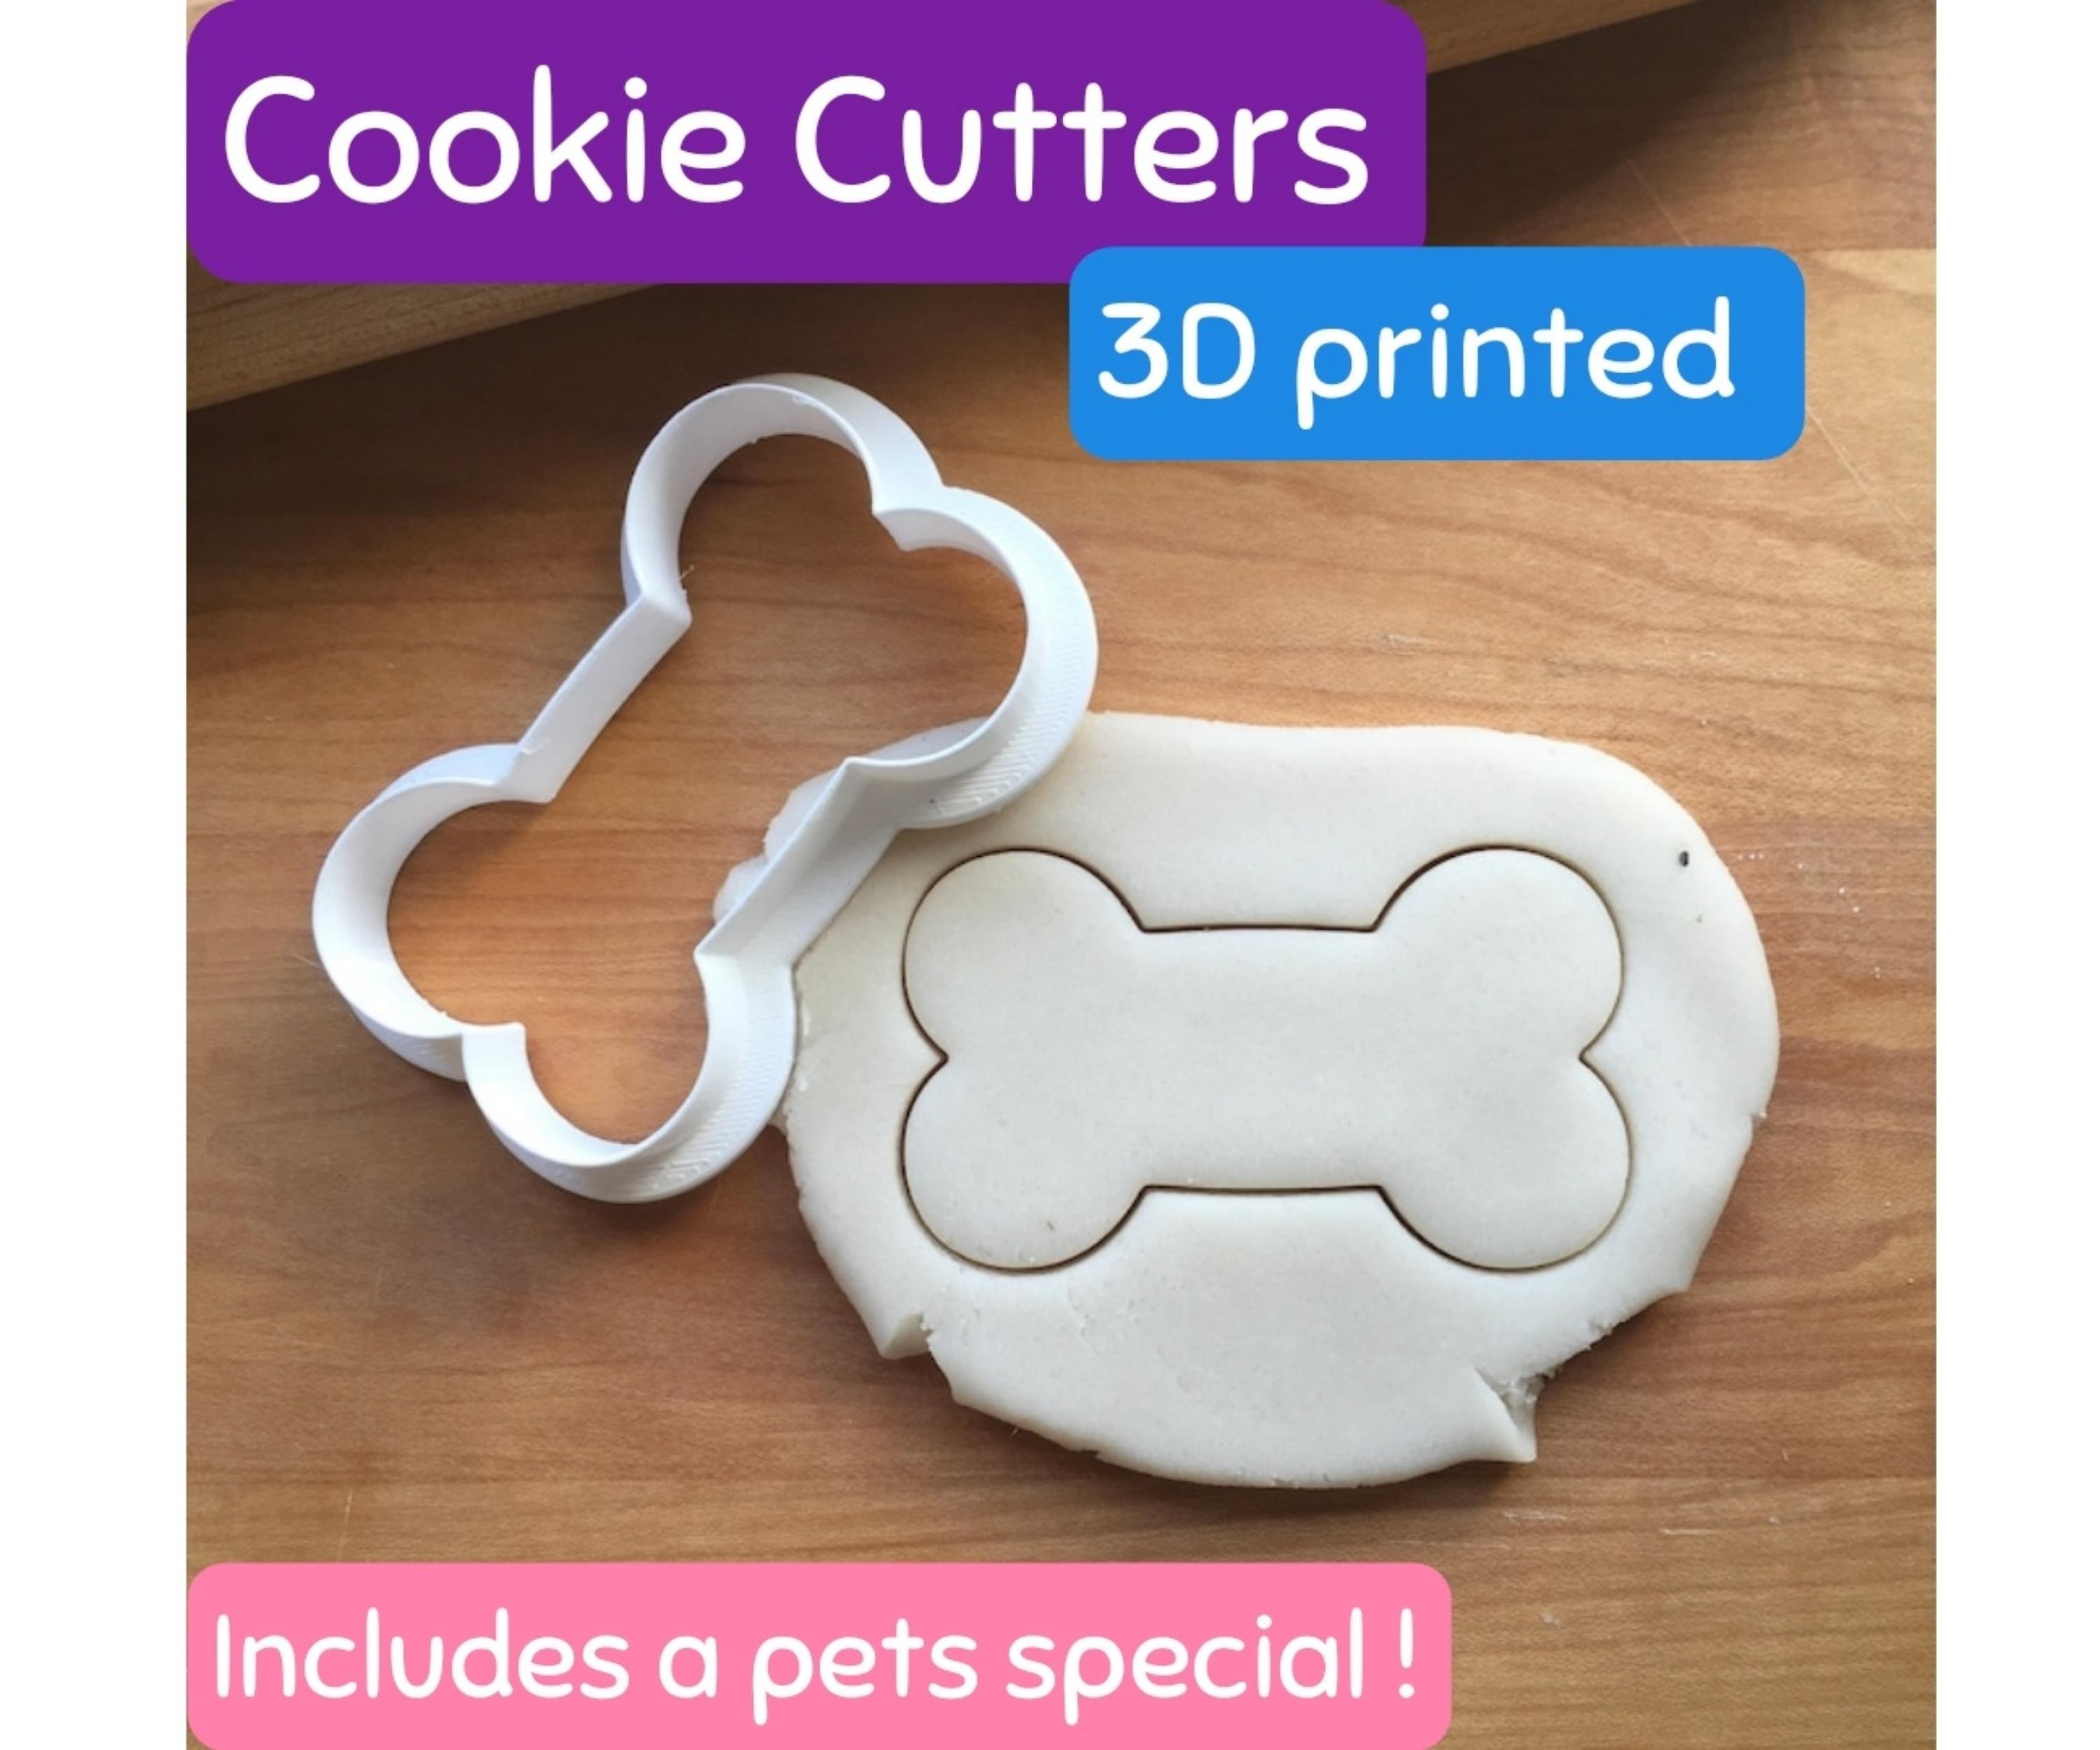 Cookie Cutter and Cookies for Dogs